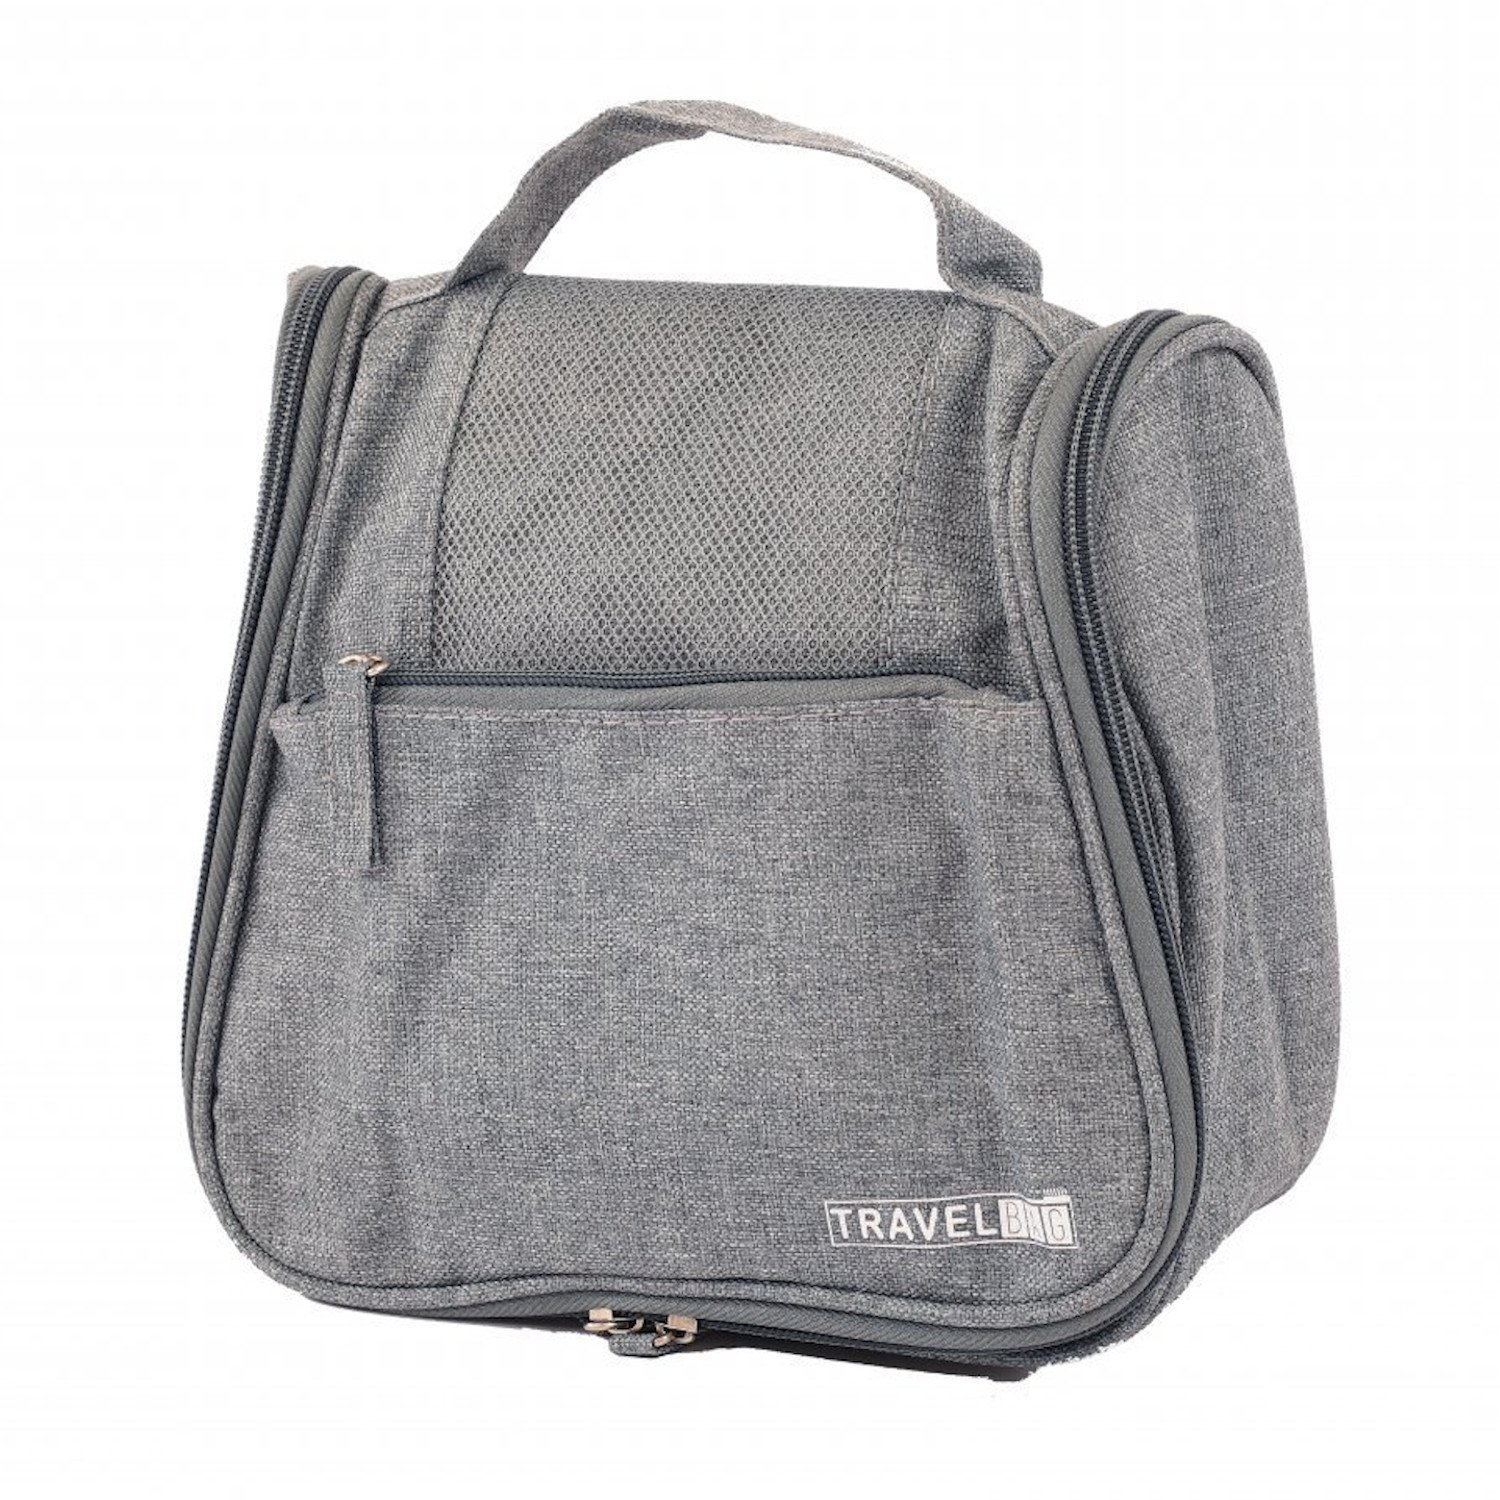 Waterproof Grey Hanging Toiletries Travel Wash Bag with Compartments